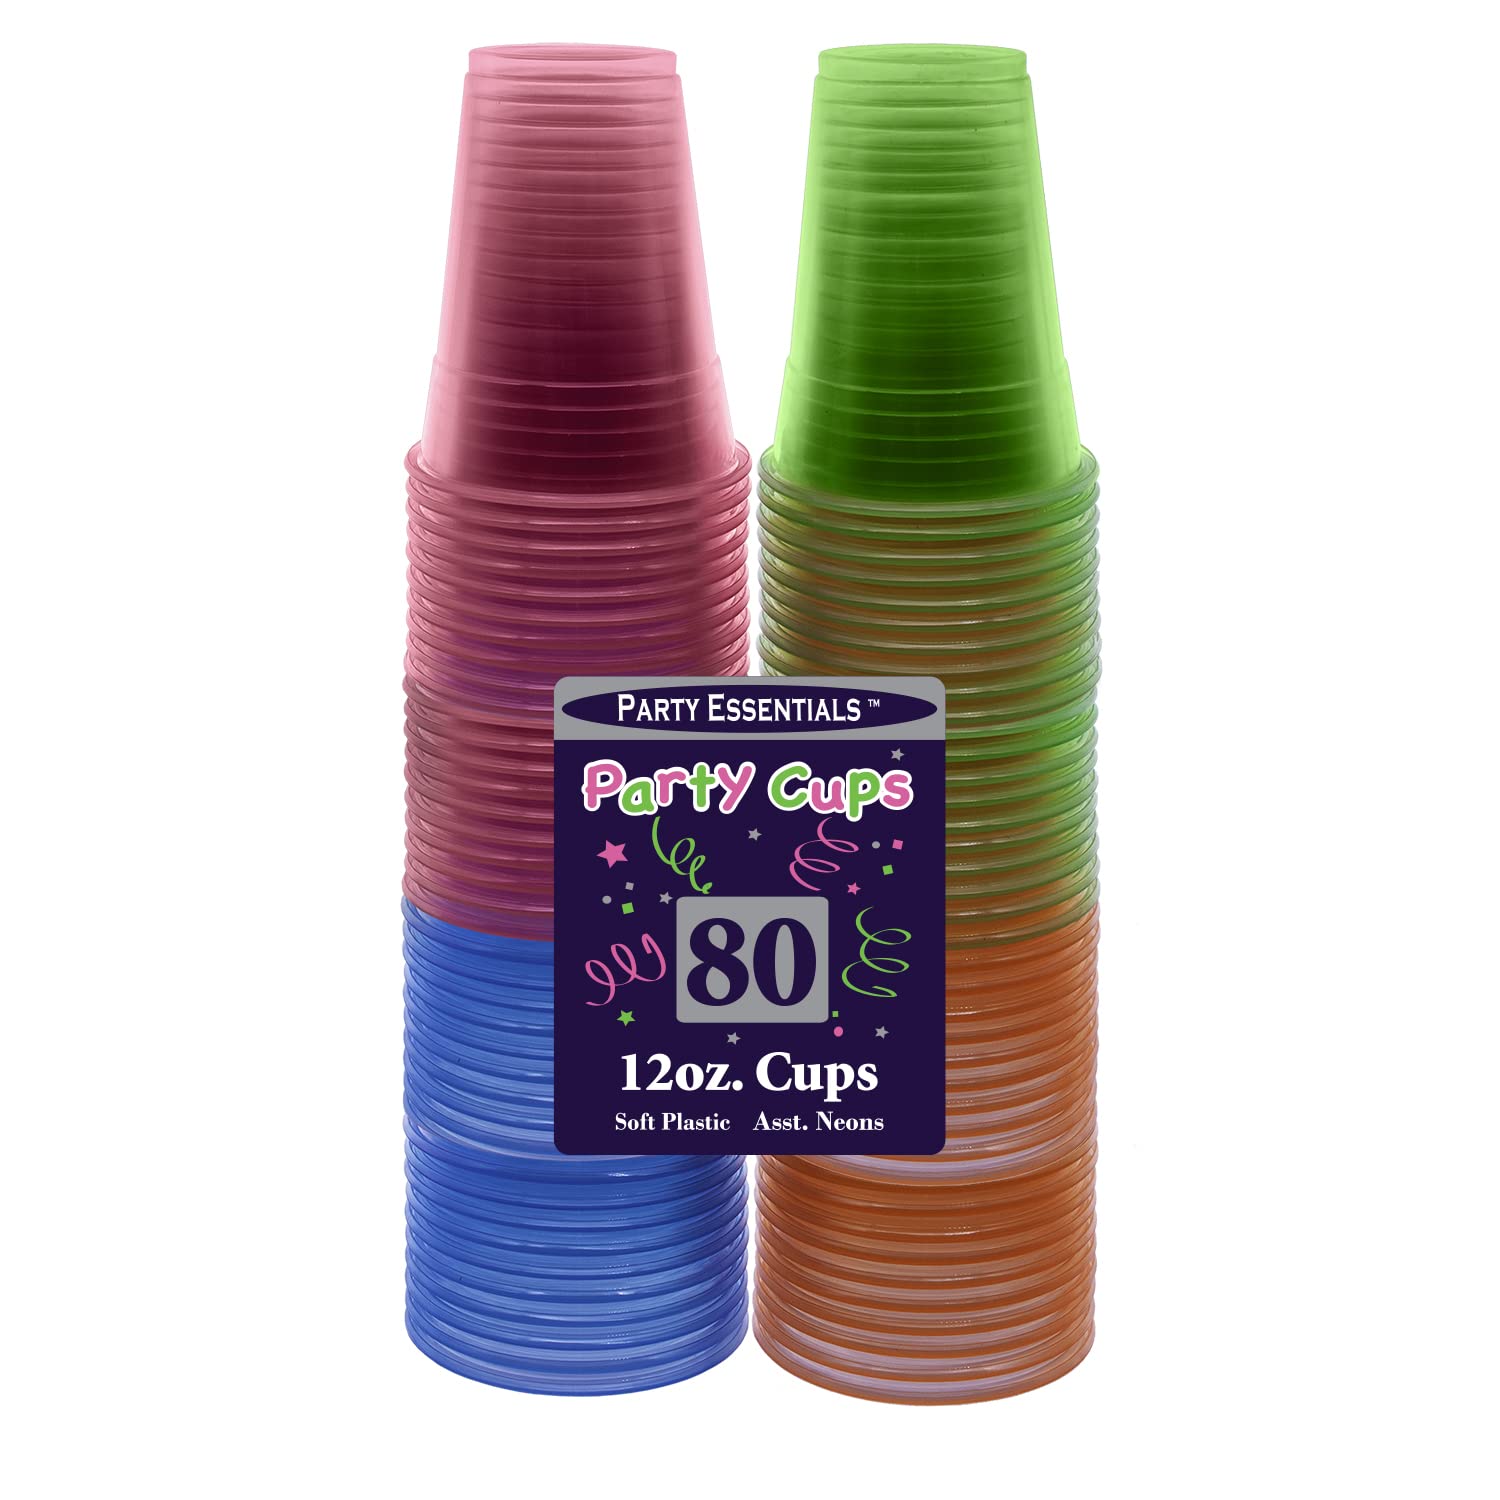 Party Essentials Soft Plastic 12-Ounce Party Cups/ Tumblers, Assorted Neon, 80-Count